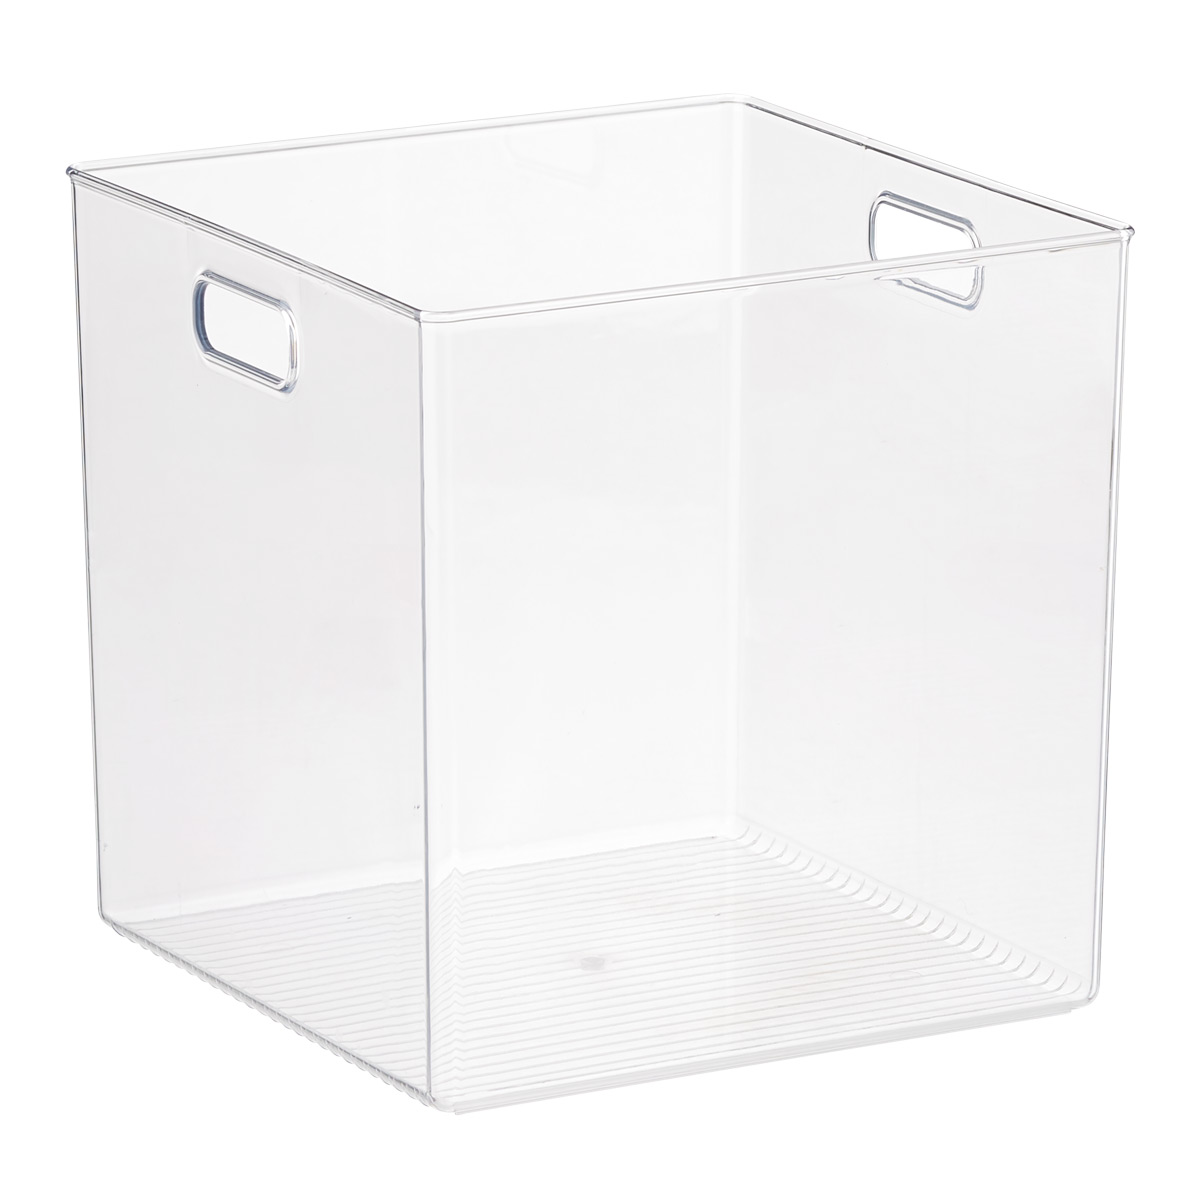 https://www.containerstore.com/catalogimages/377170/10079281-linus-cube-bin-with-handles.jpg